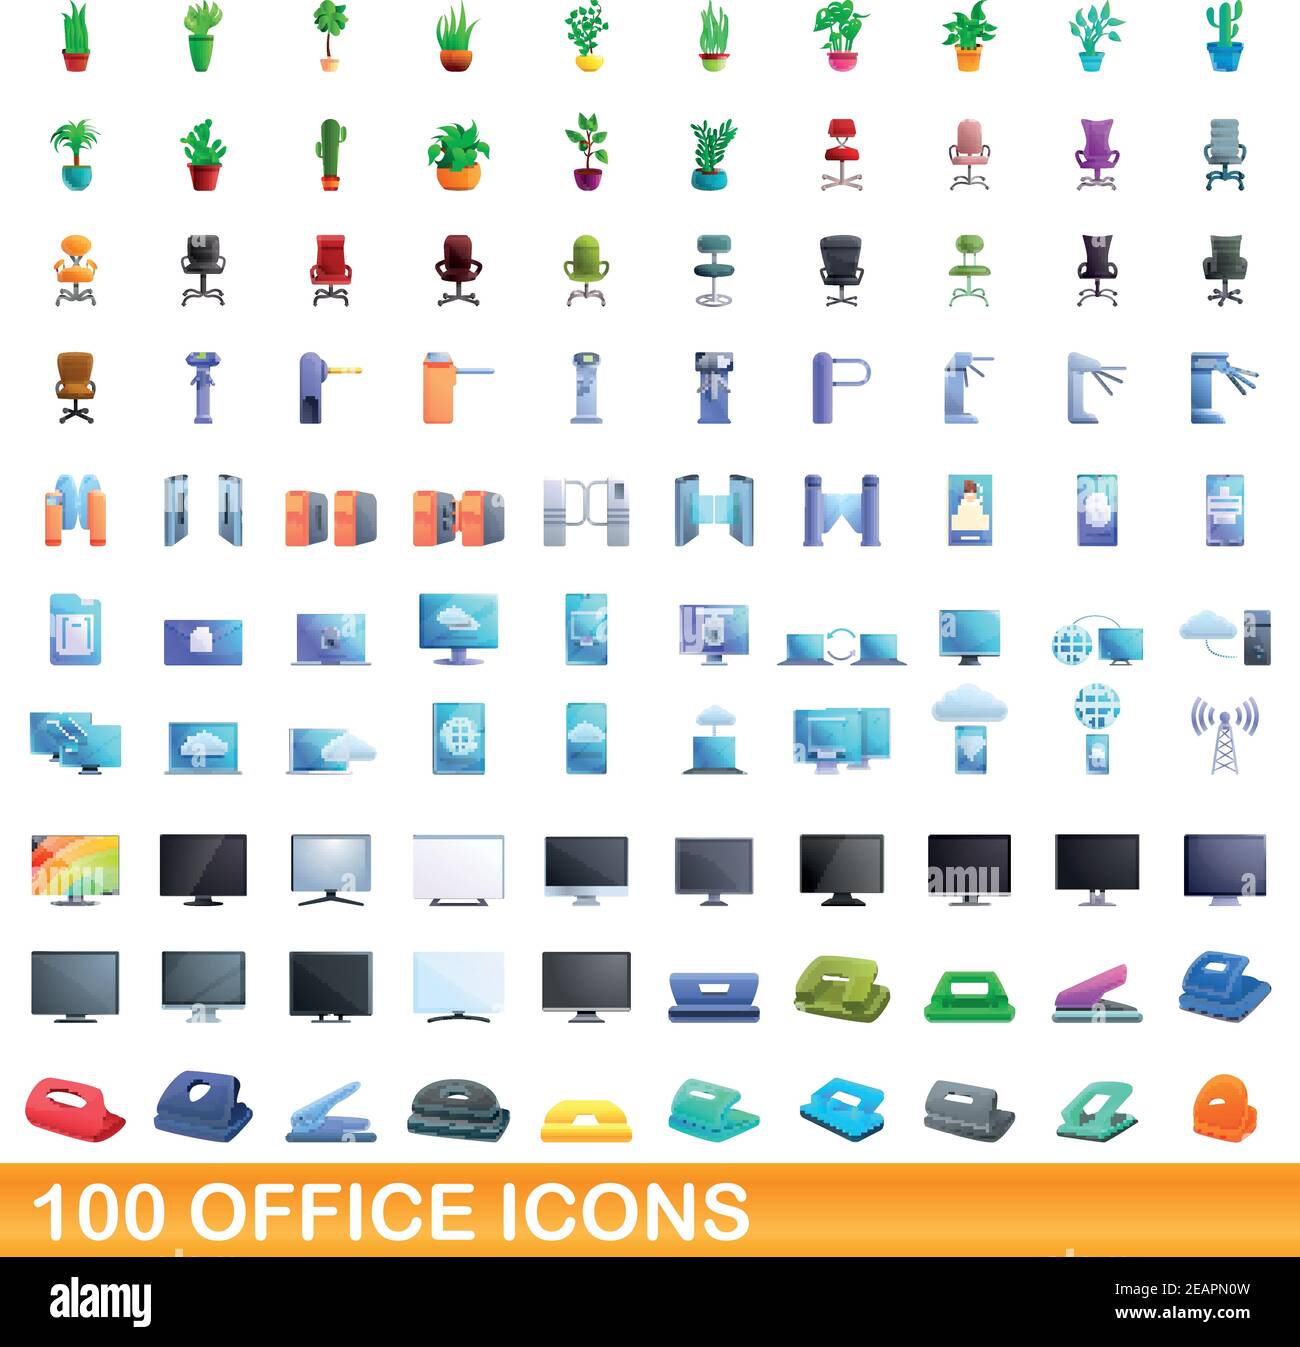 100 office icons set. Cartoon illustration of 100 office icons vector set isolated on white background Stock Vector